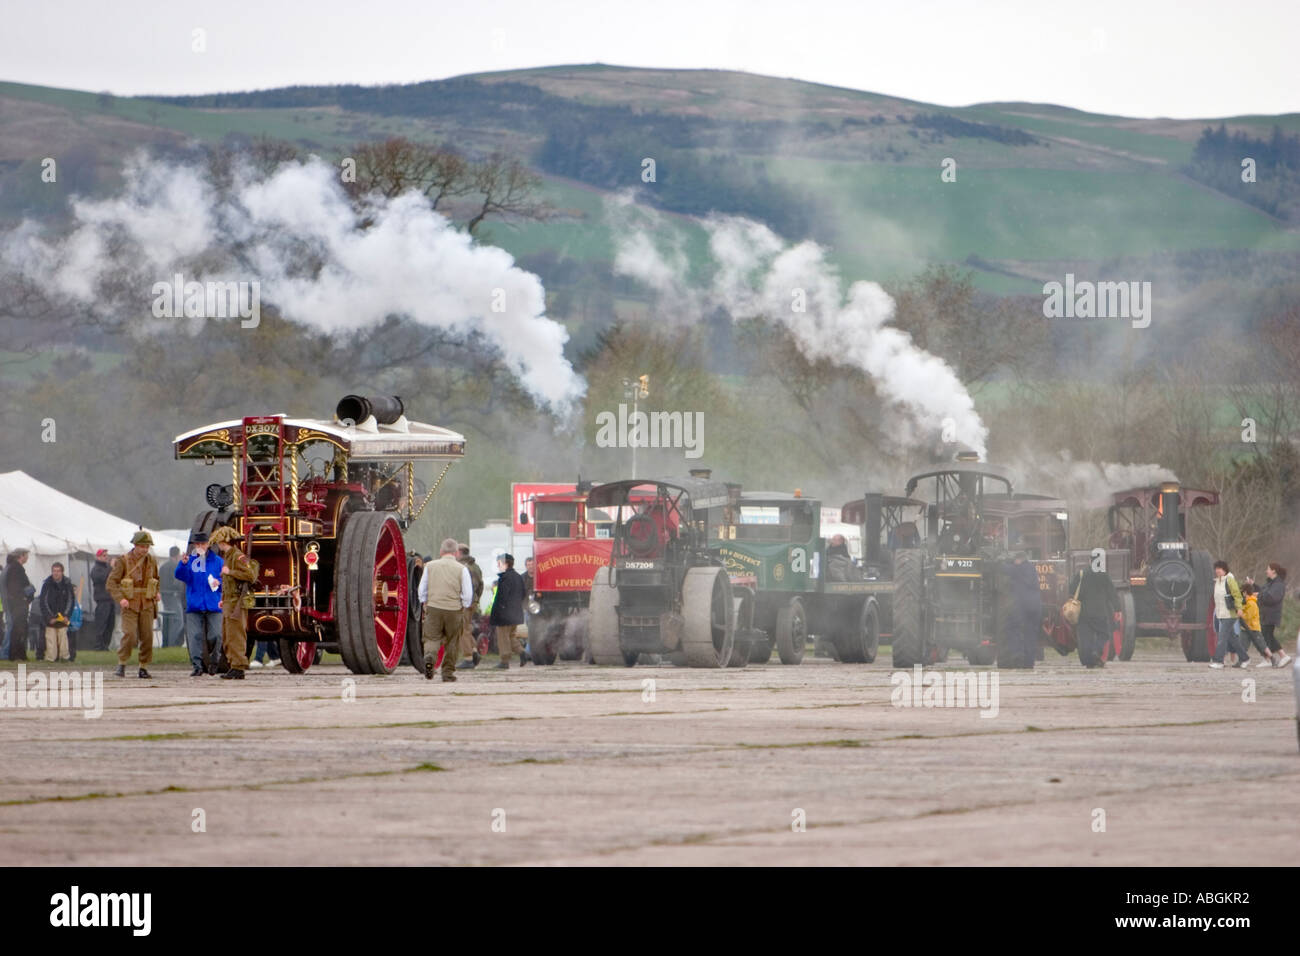 Vintage steam traction engine rally Stock Photo